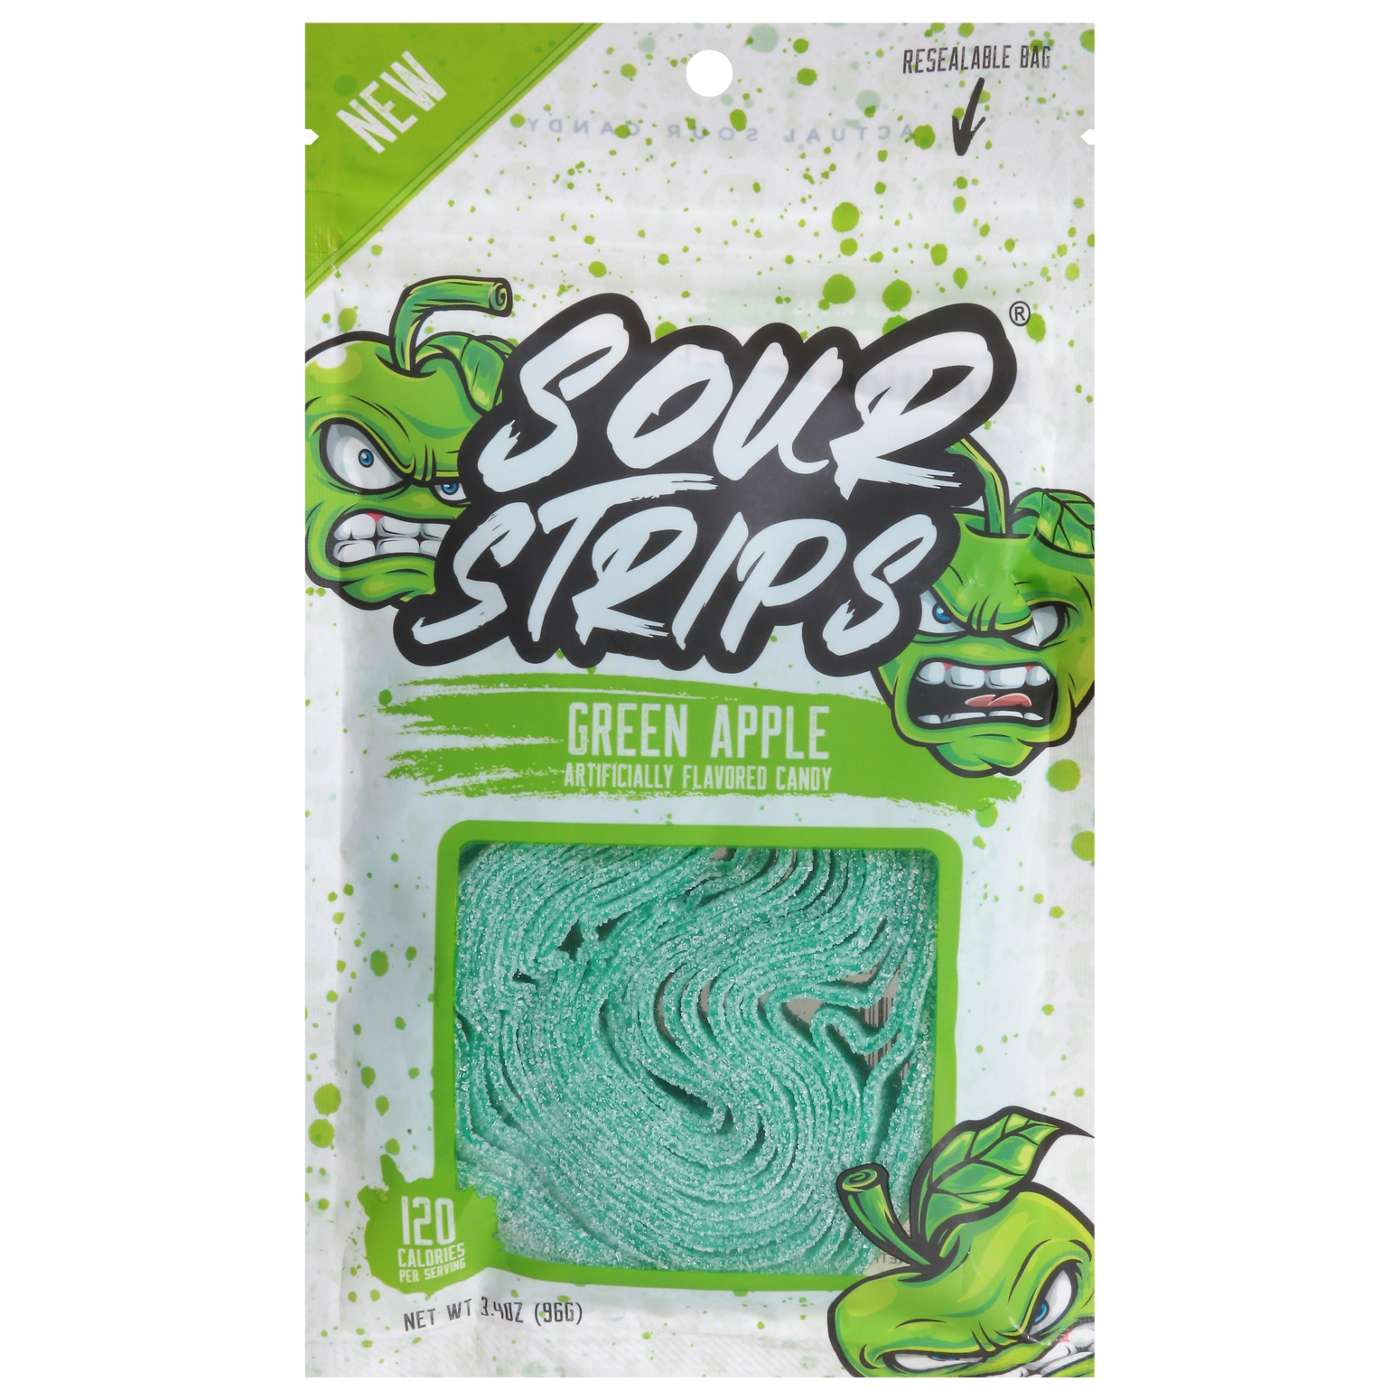 Sour Strips Green Apple Candy; image 1 of 2